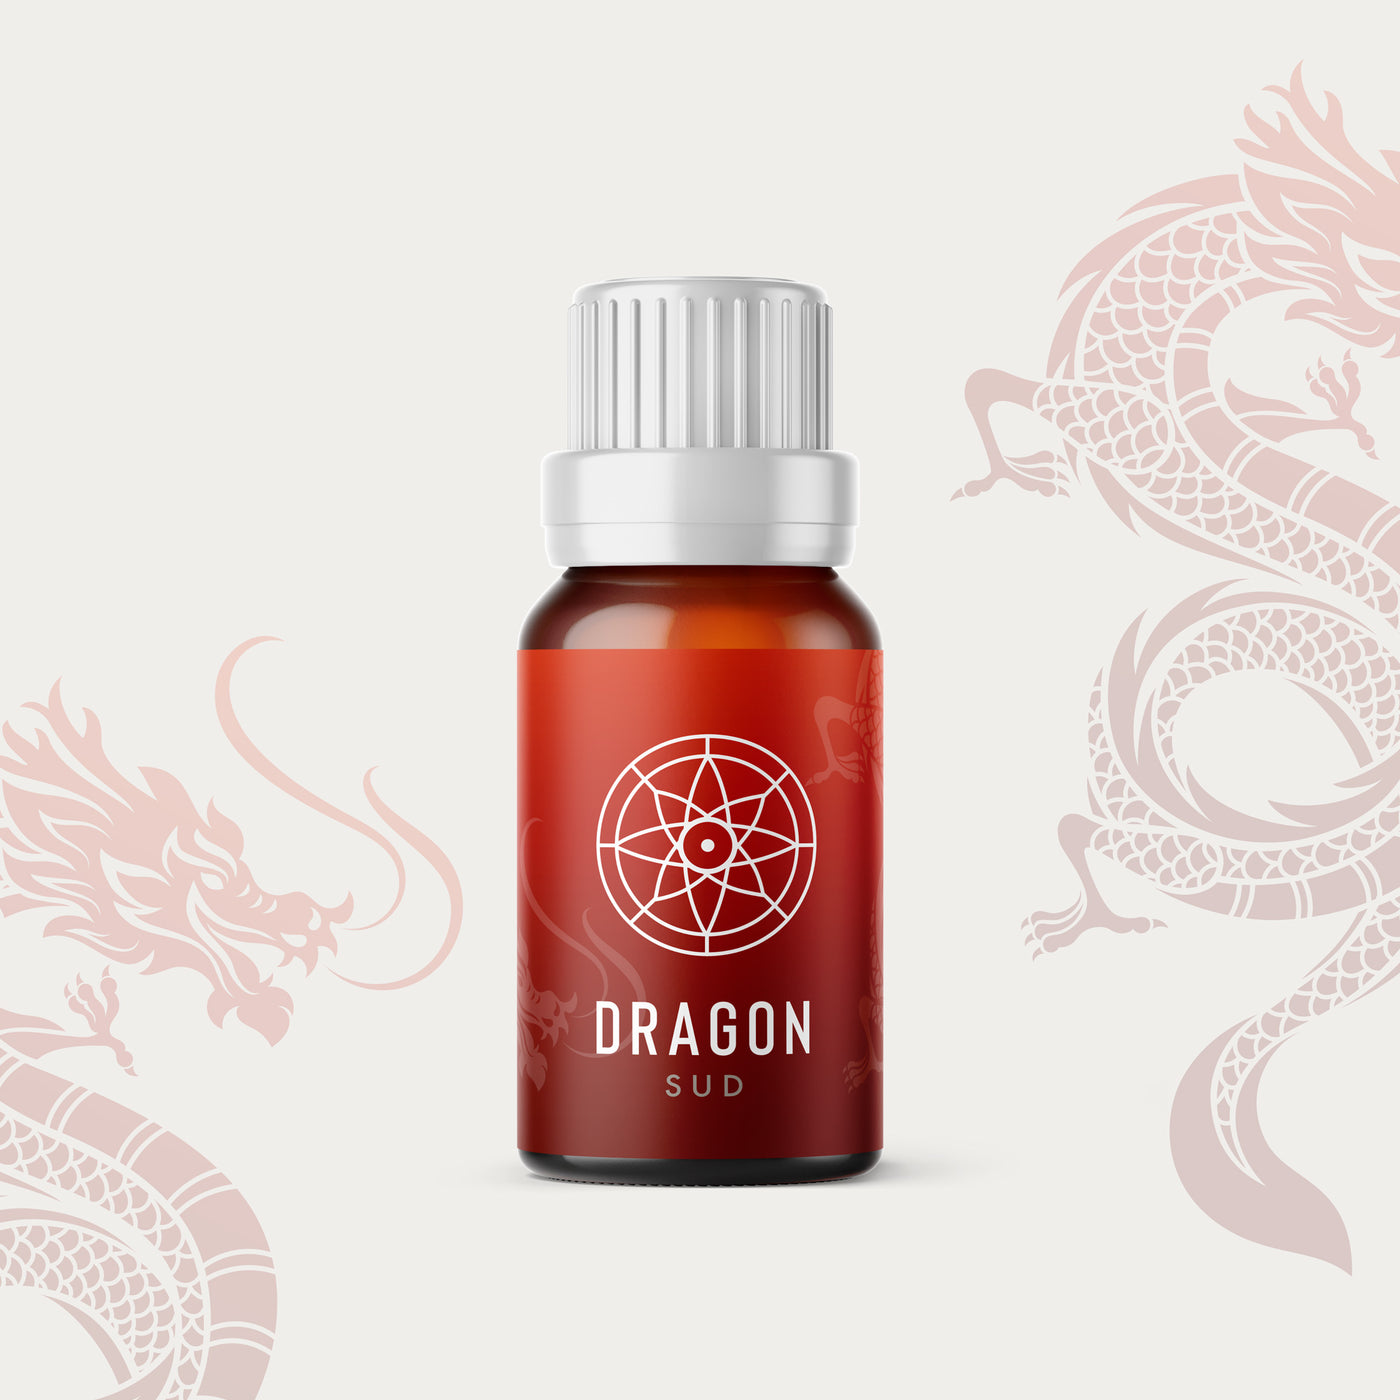 Dragon - Synergie aromatique 100% pure